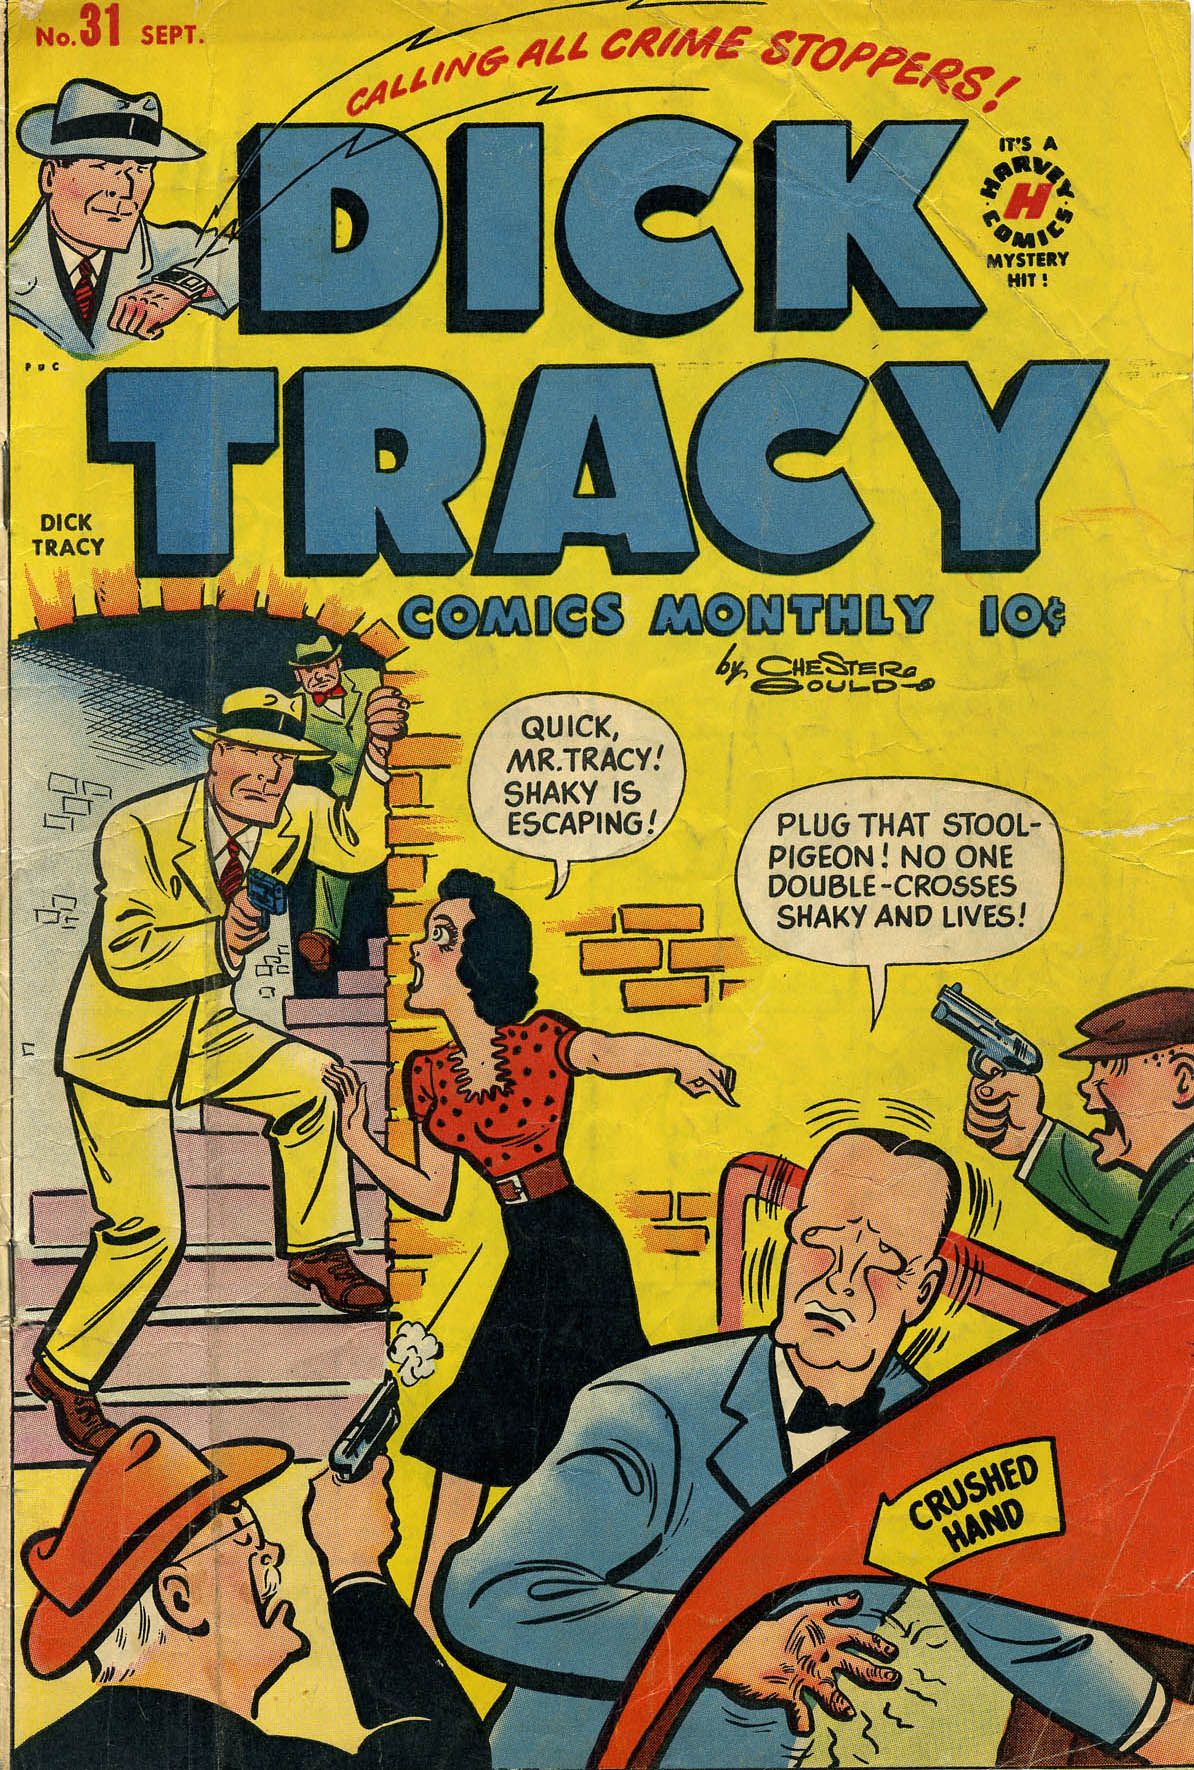 Read online Dick Tracy comic -  Issue #31 - 1